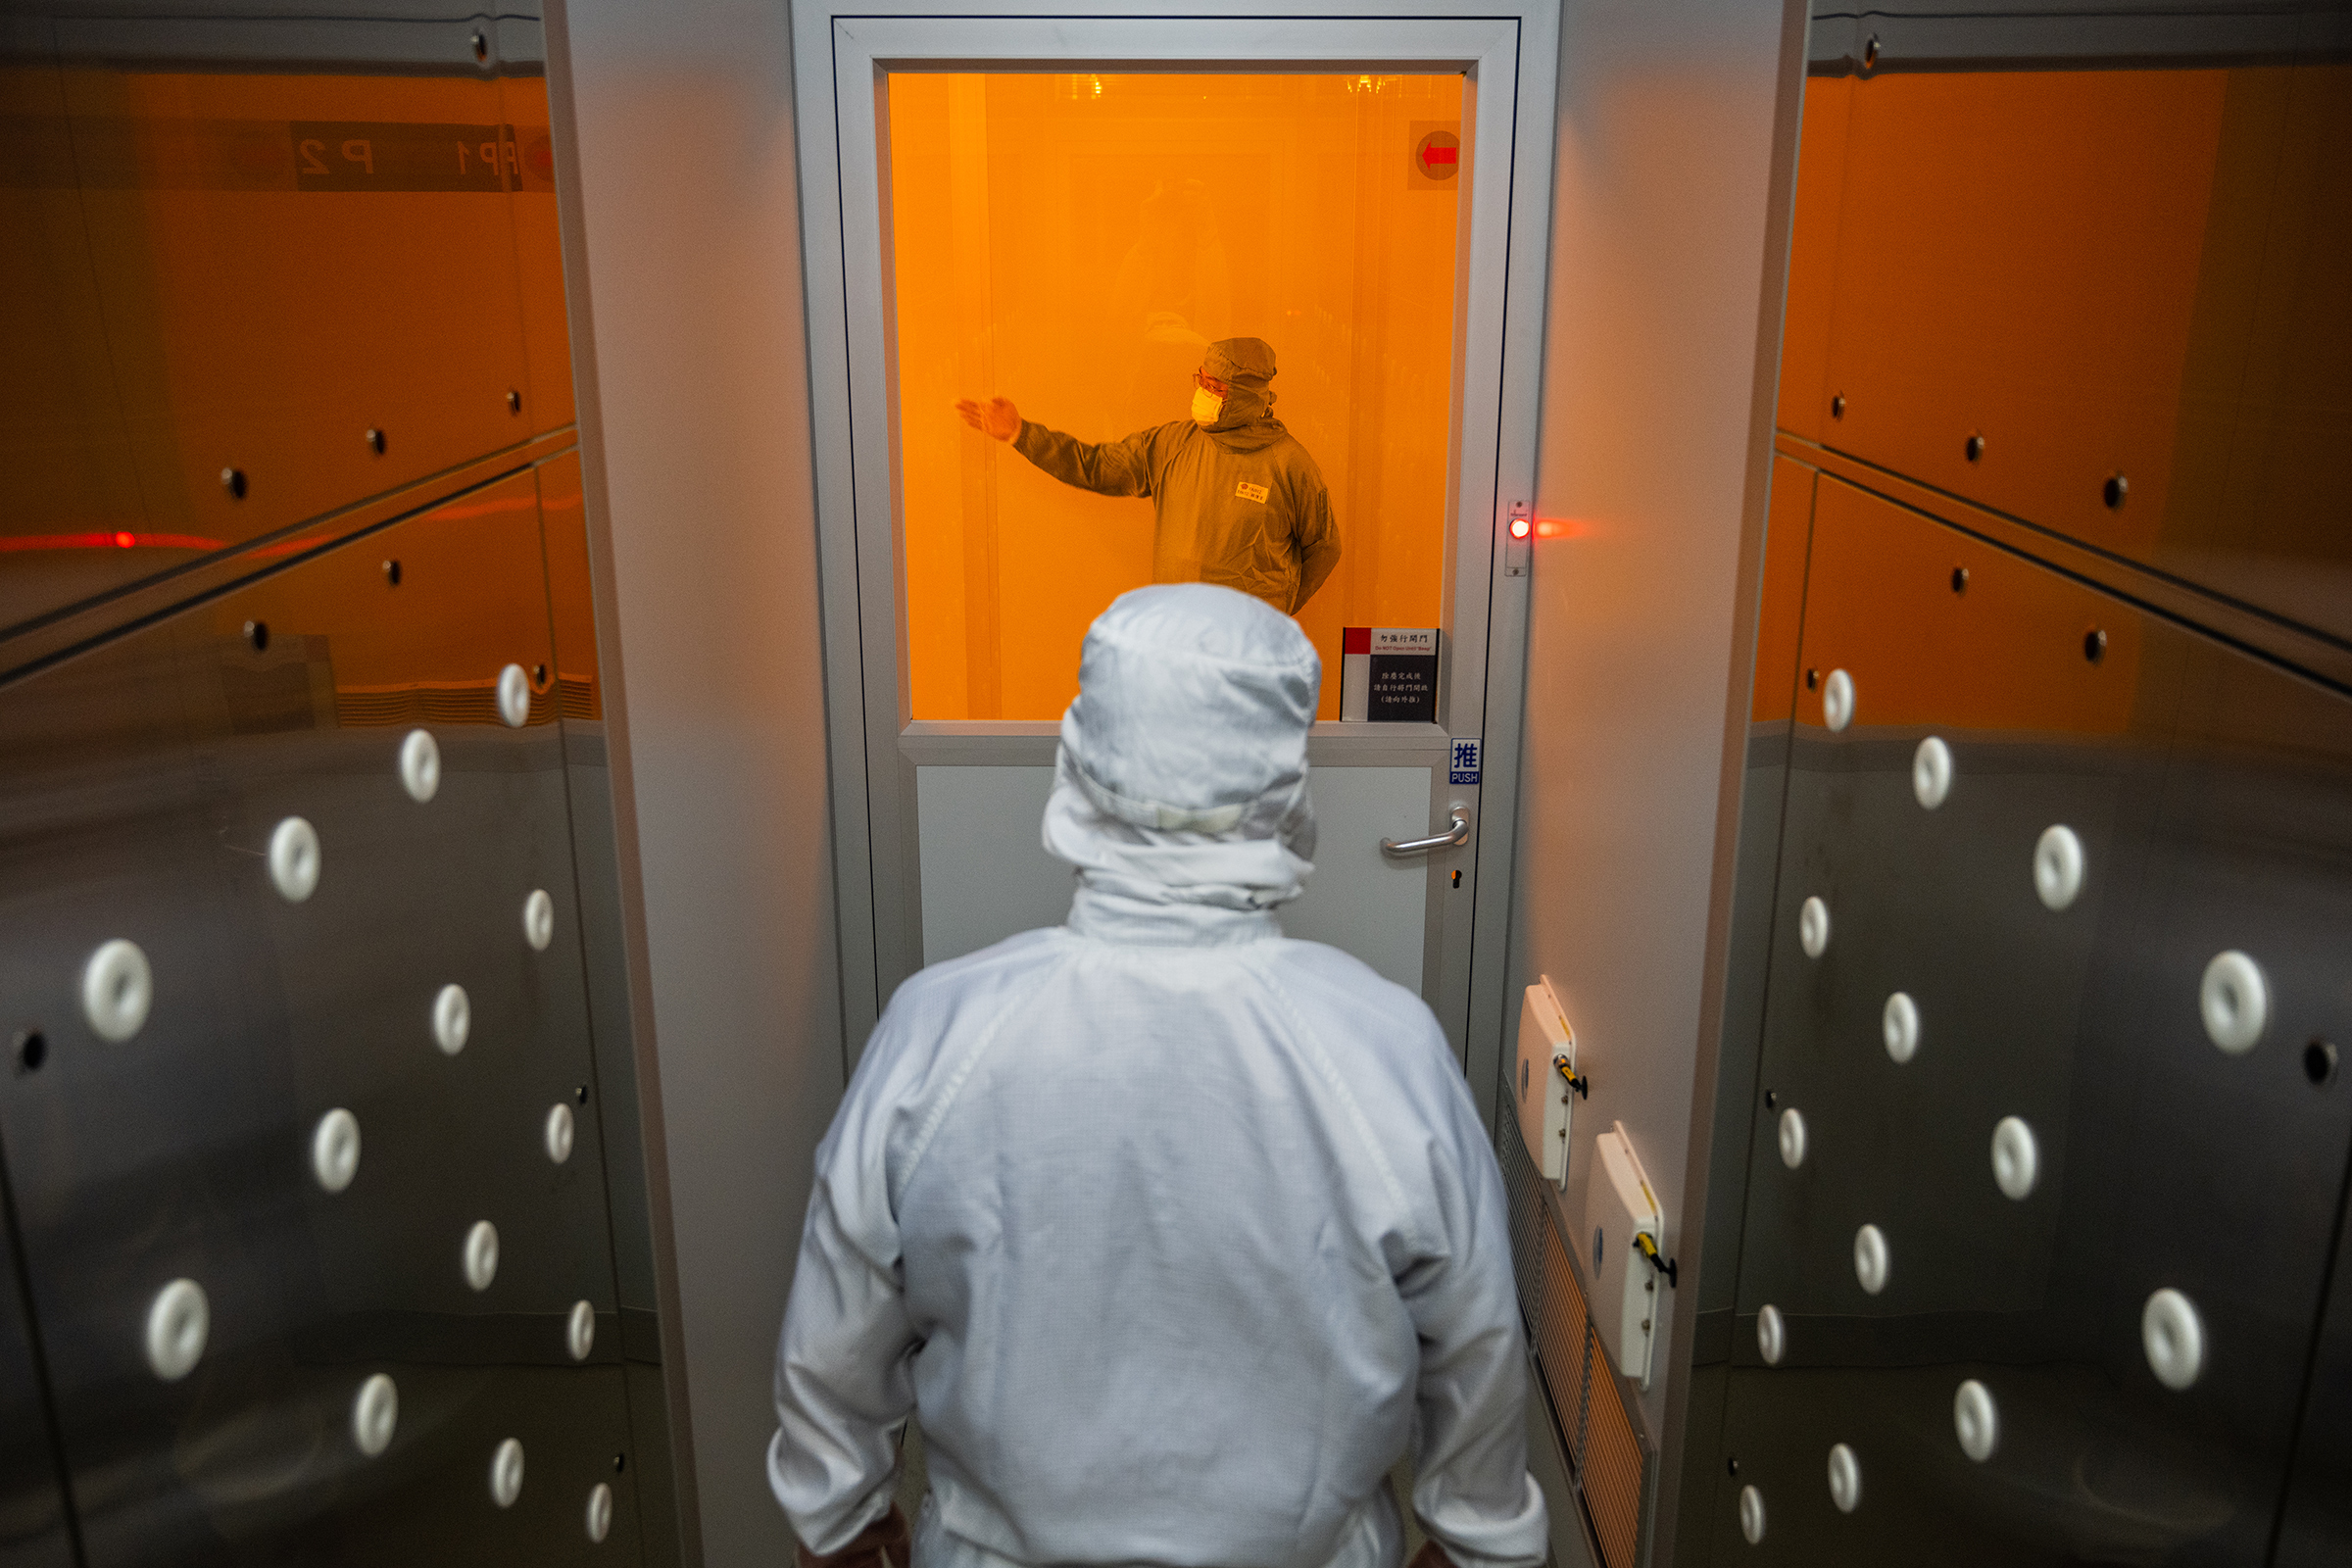 A worker enters a “clean room” at chipmaker TSMC’s headquarters in Hsinchu, Taiwan, on Sept. 10 (Billy H.C. Kwok for TIME)